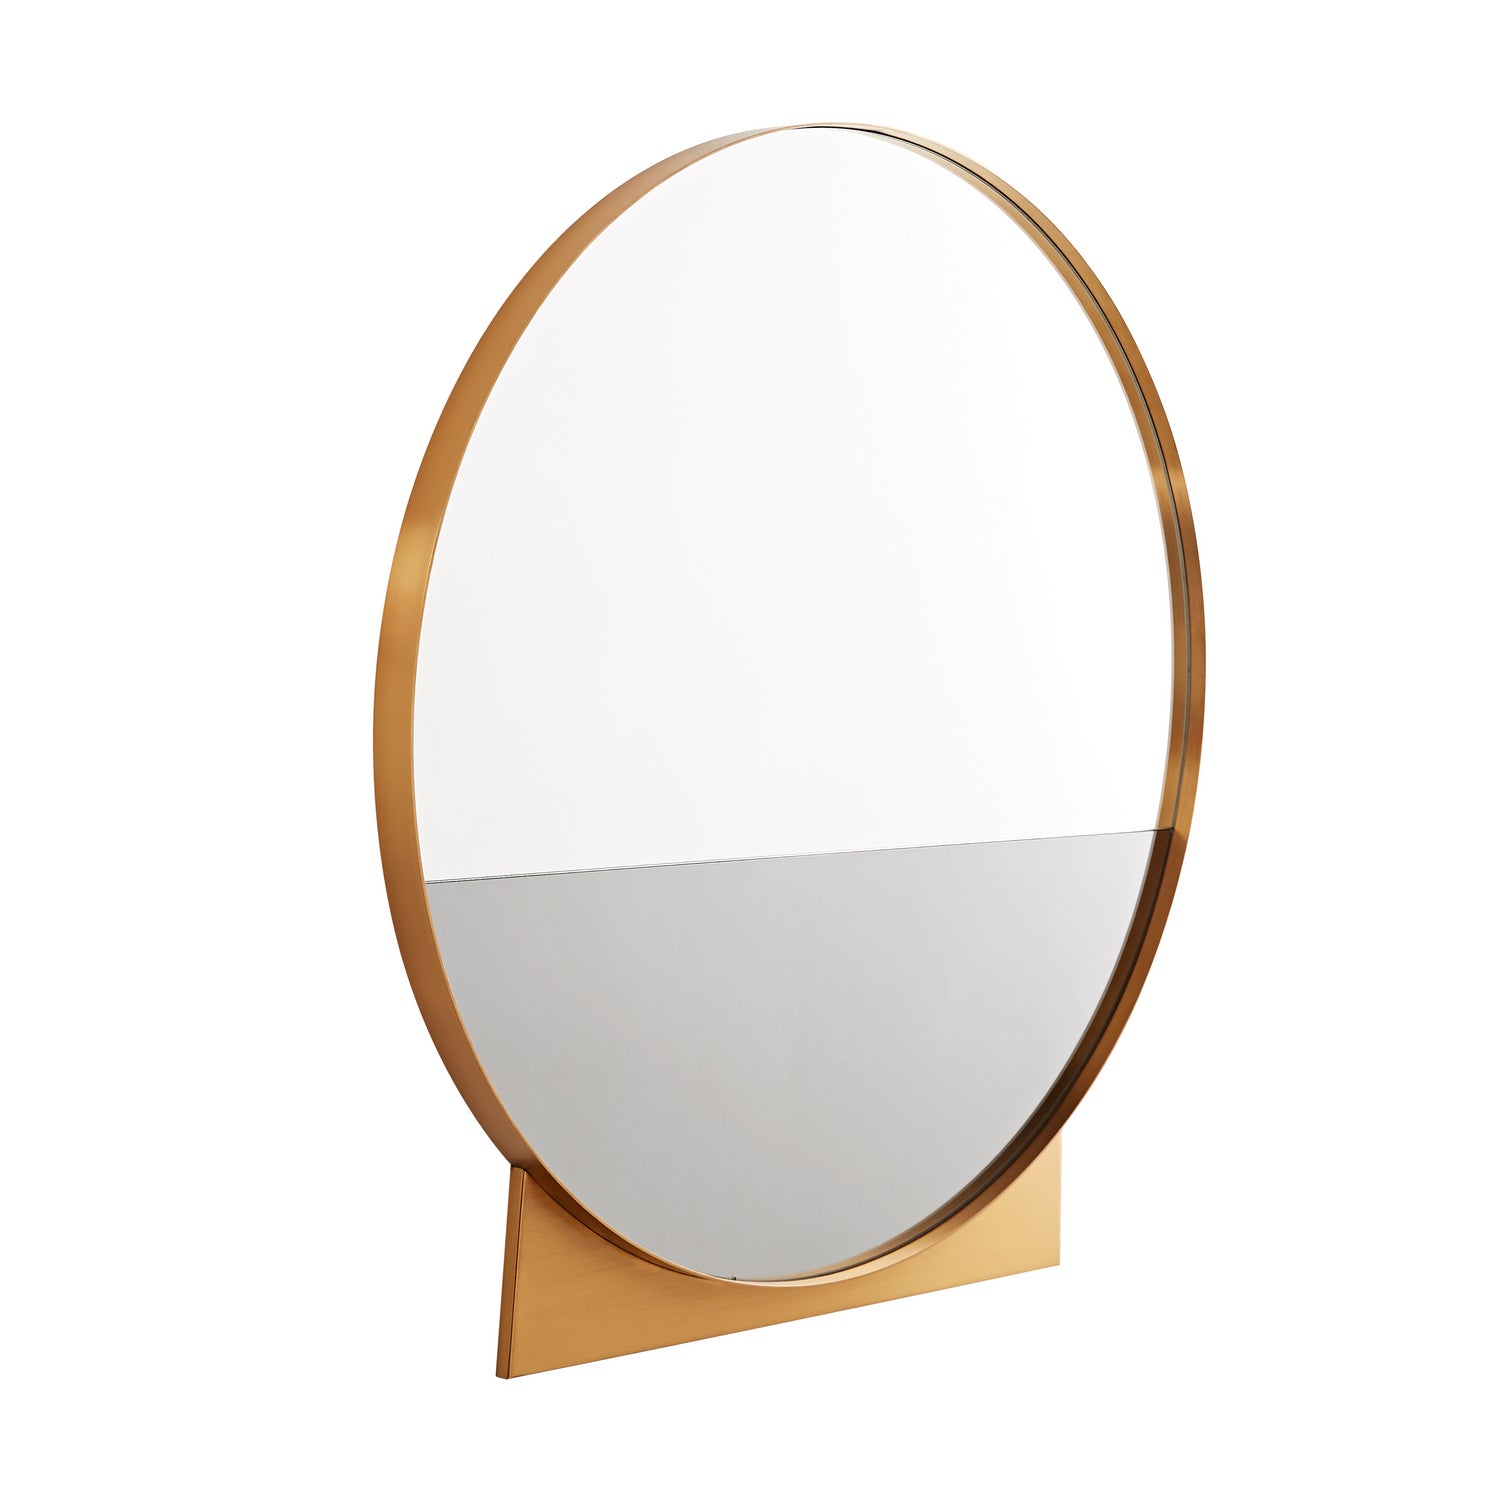 Mirror from the Datum collection in Antique Brass finish